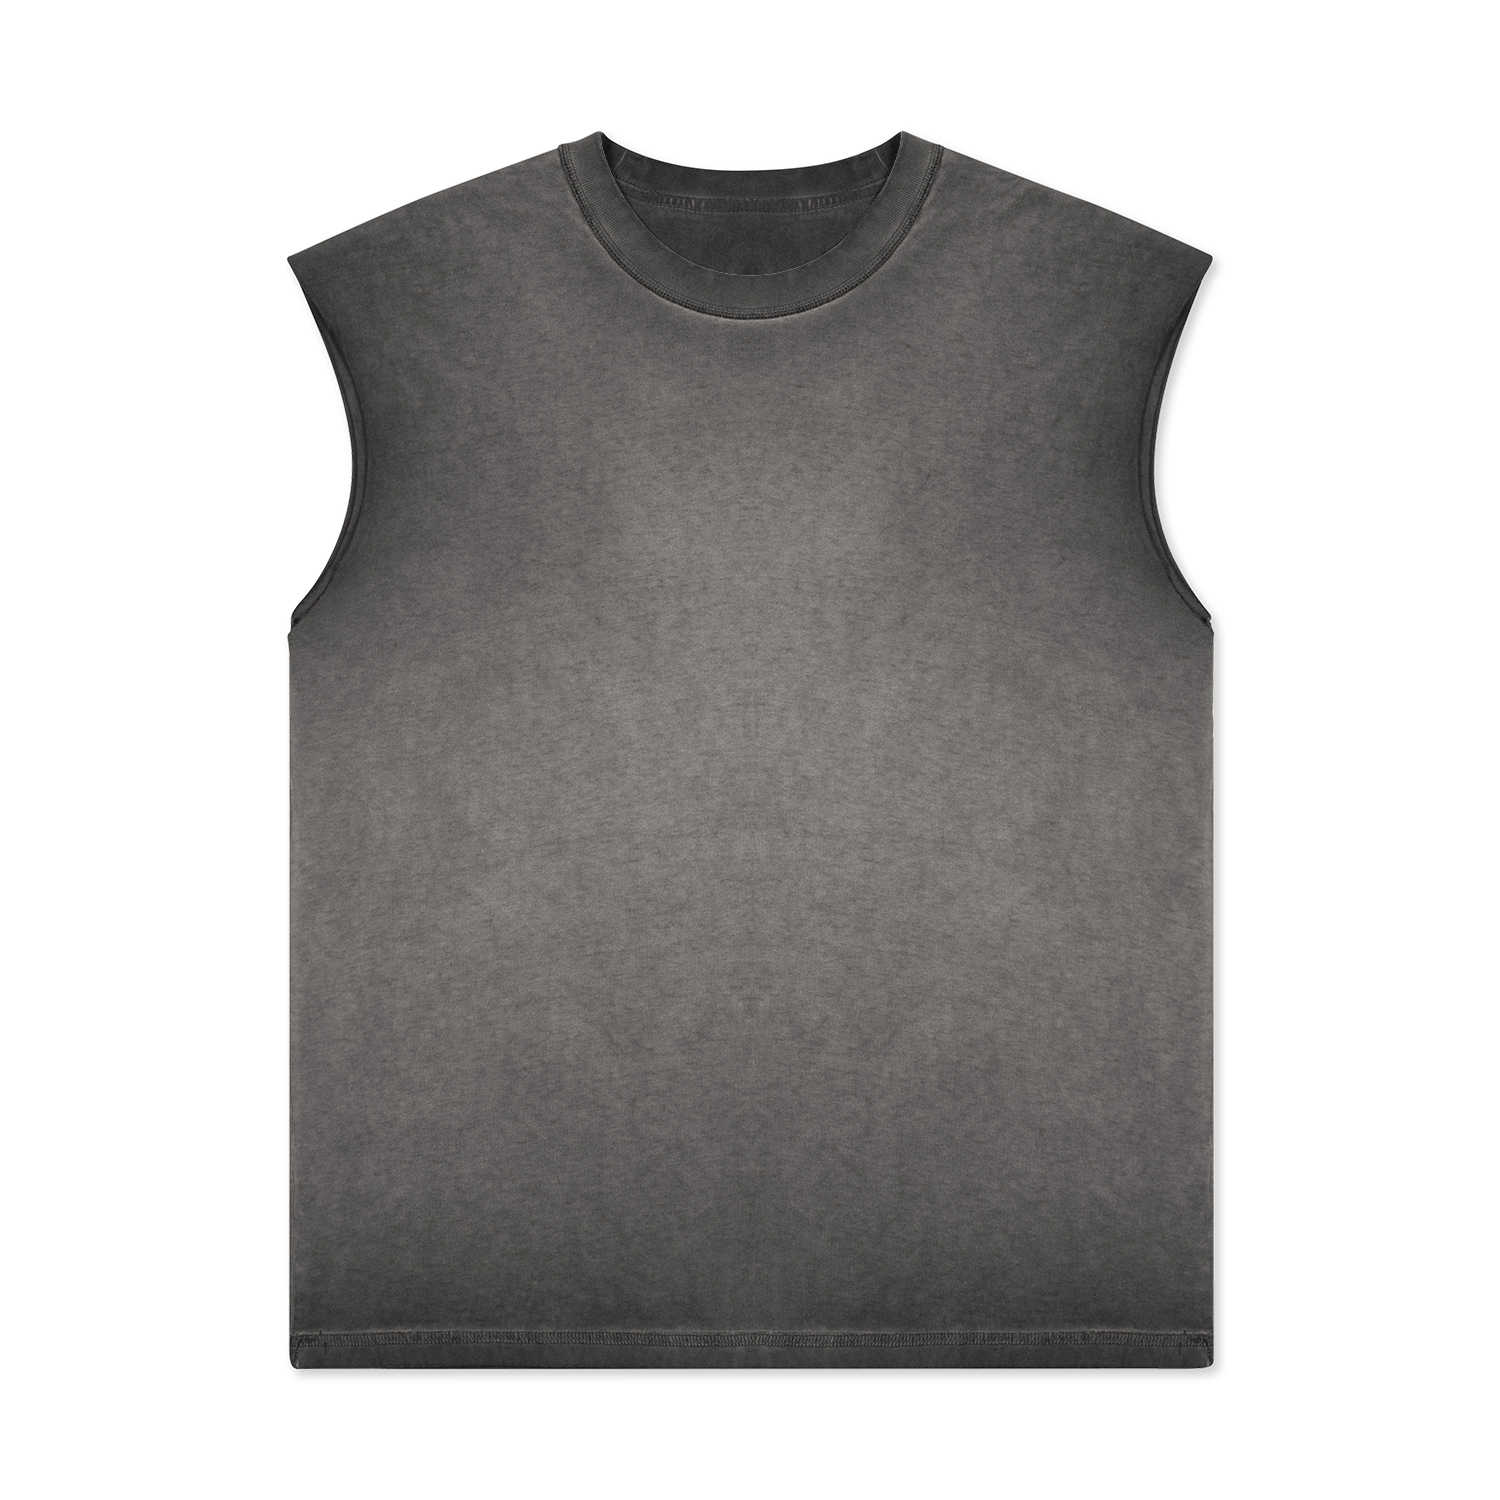 How To Wash Tank Tops?